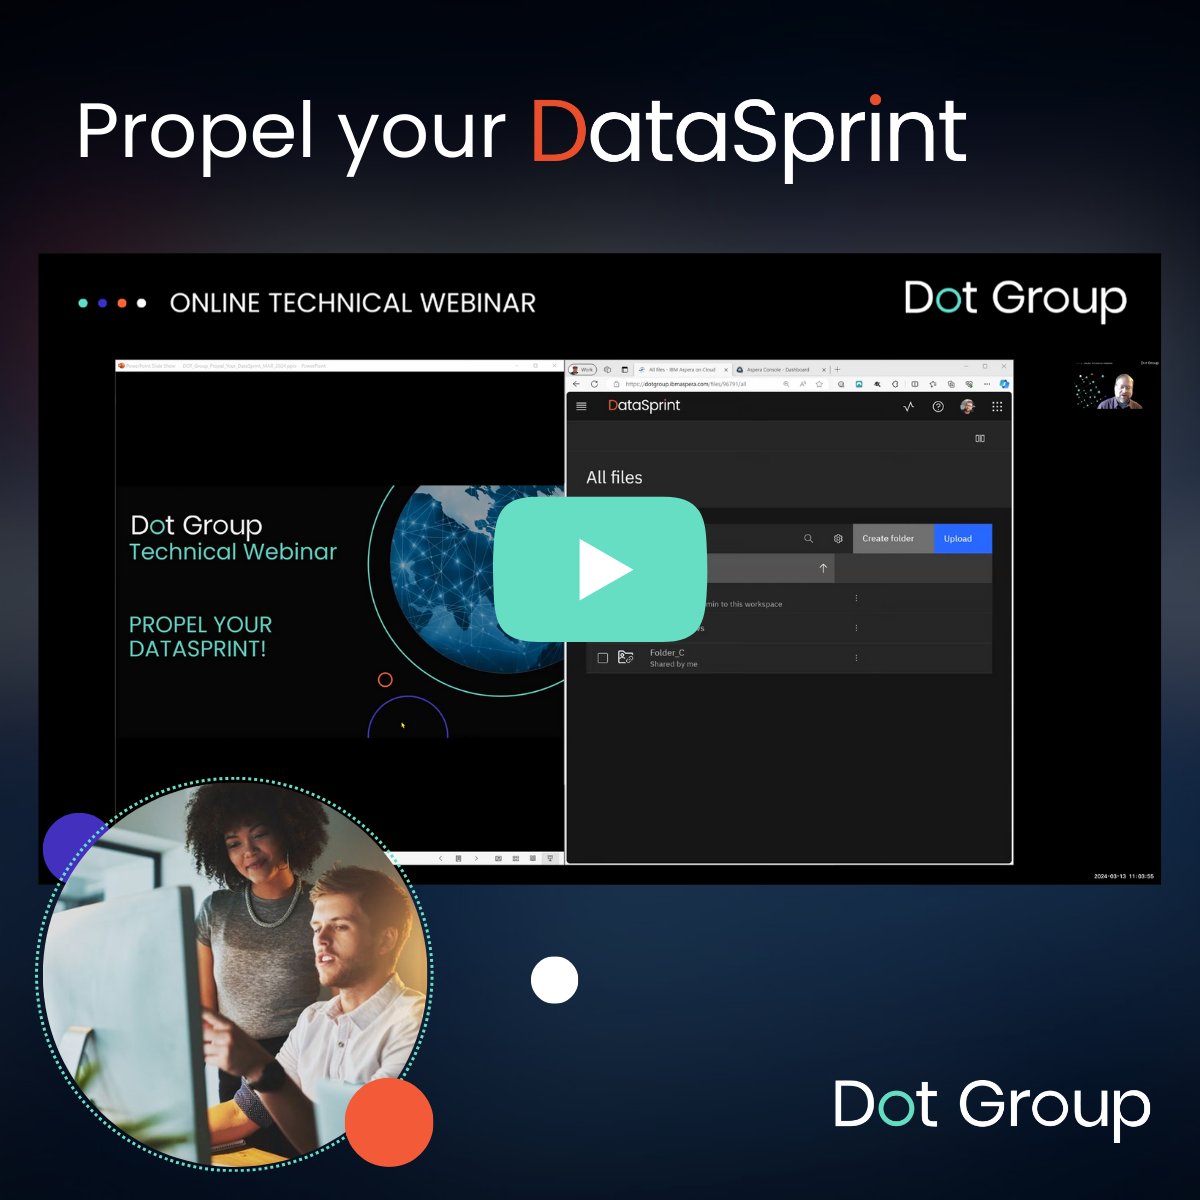 If you missed our recent #DataSprint webinar, head here to request access to the recording and discover the full potential of our scalable #data solution powered by IBM Aspera technology: bit.ly/4a6VVlt  

#datatransfer #datatransport #PoweredByIBM #TheDataExperts